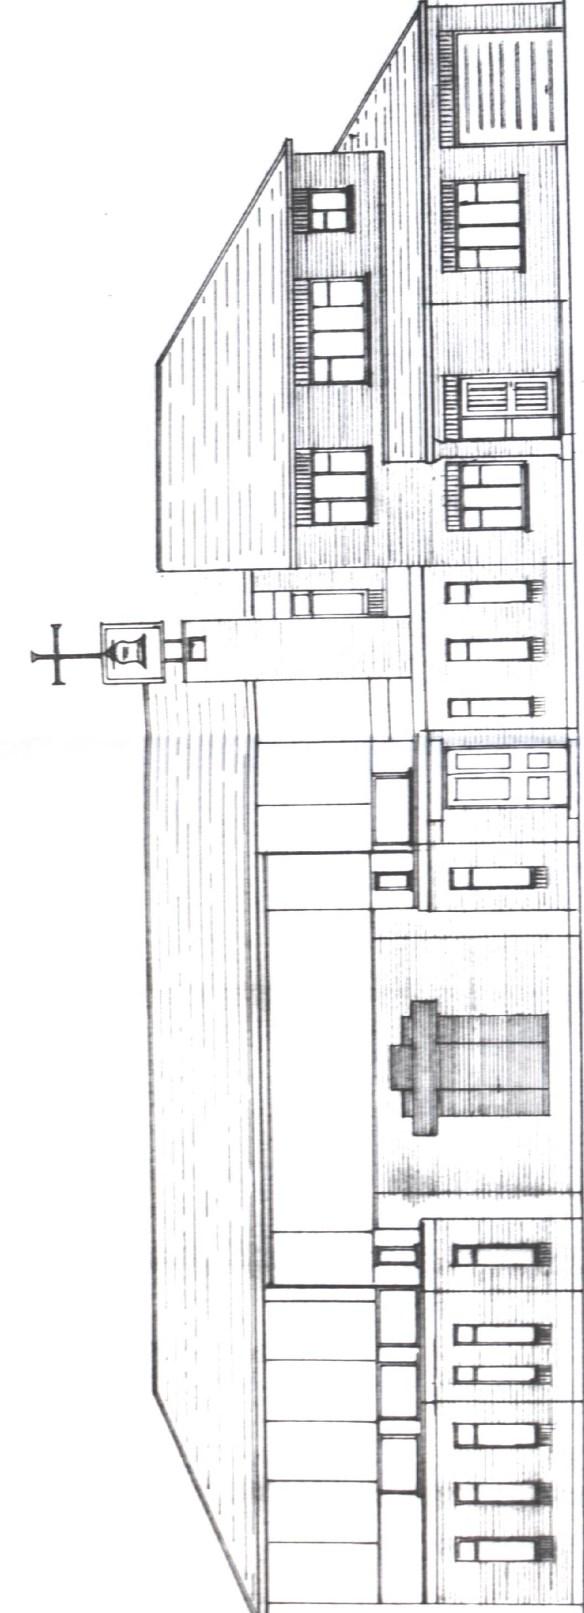 An architectural drawing depicting the proposed new church design and